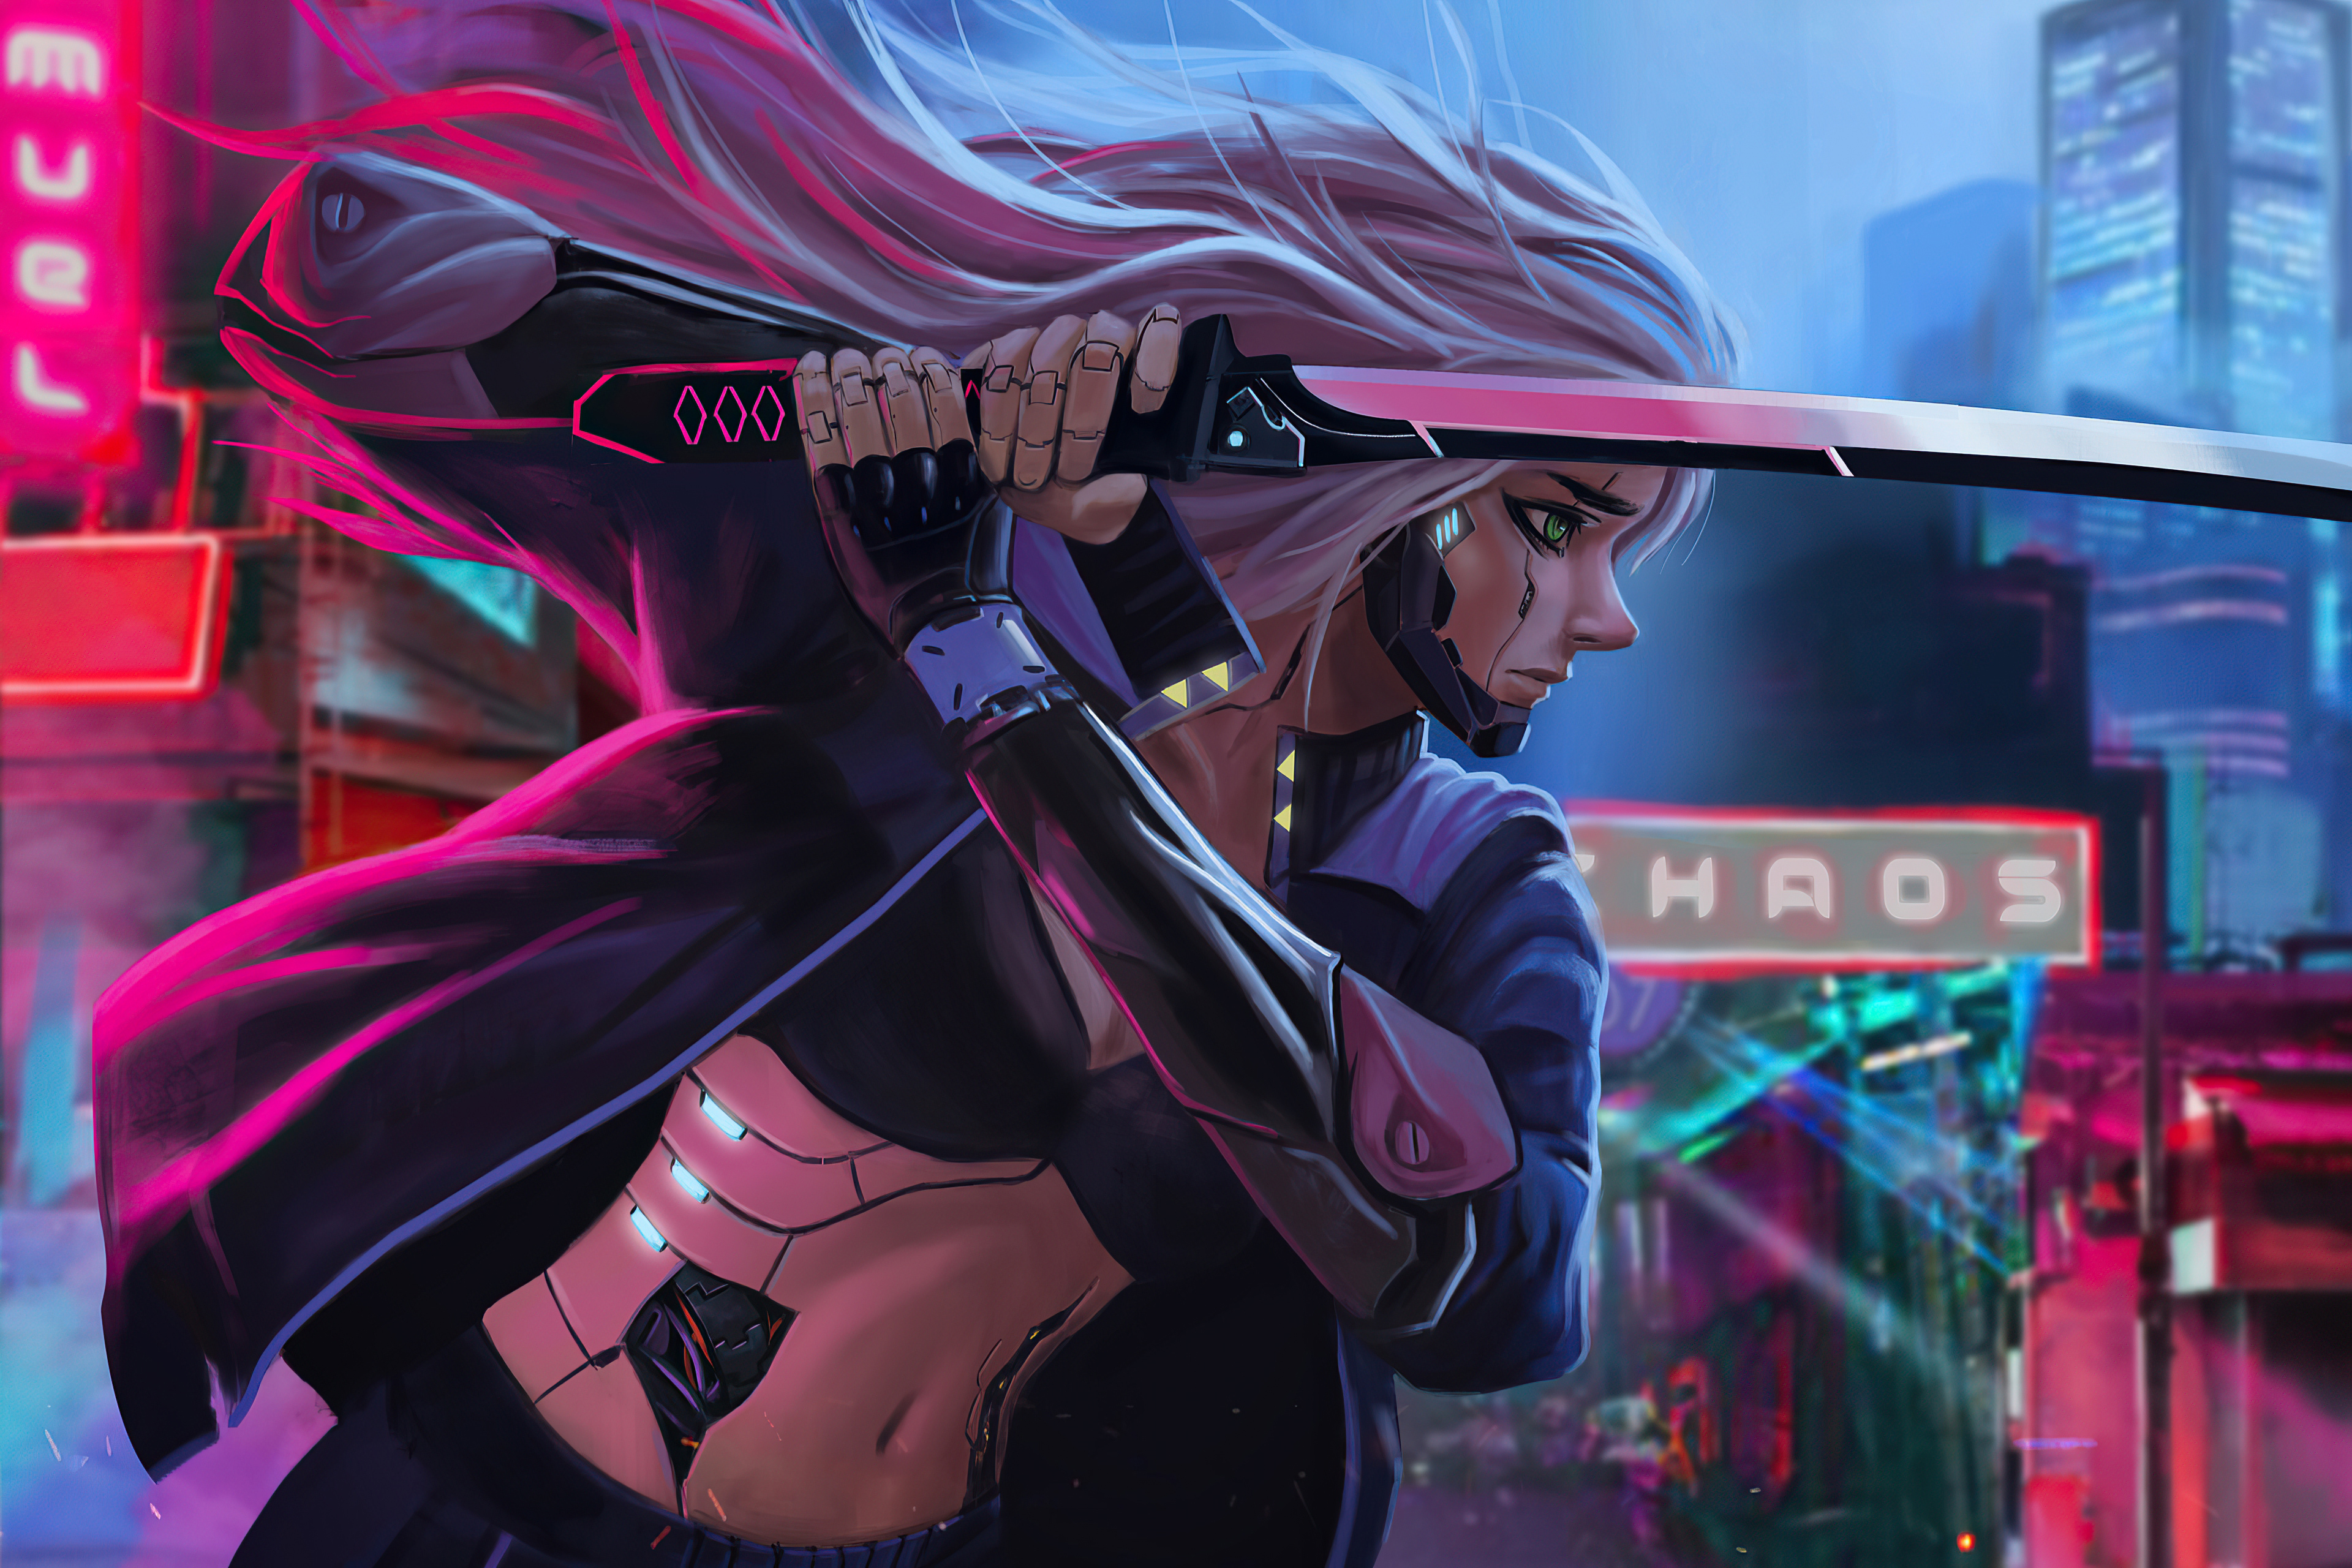 Cyberpunk Scifi Cyborg Girl With Sword 4k, HD Artist, 4k Wallpaper, Image, Background, Photo and Picture